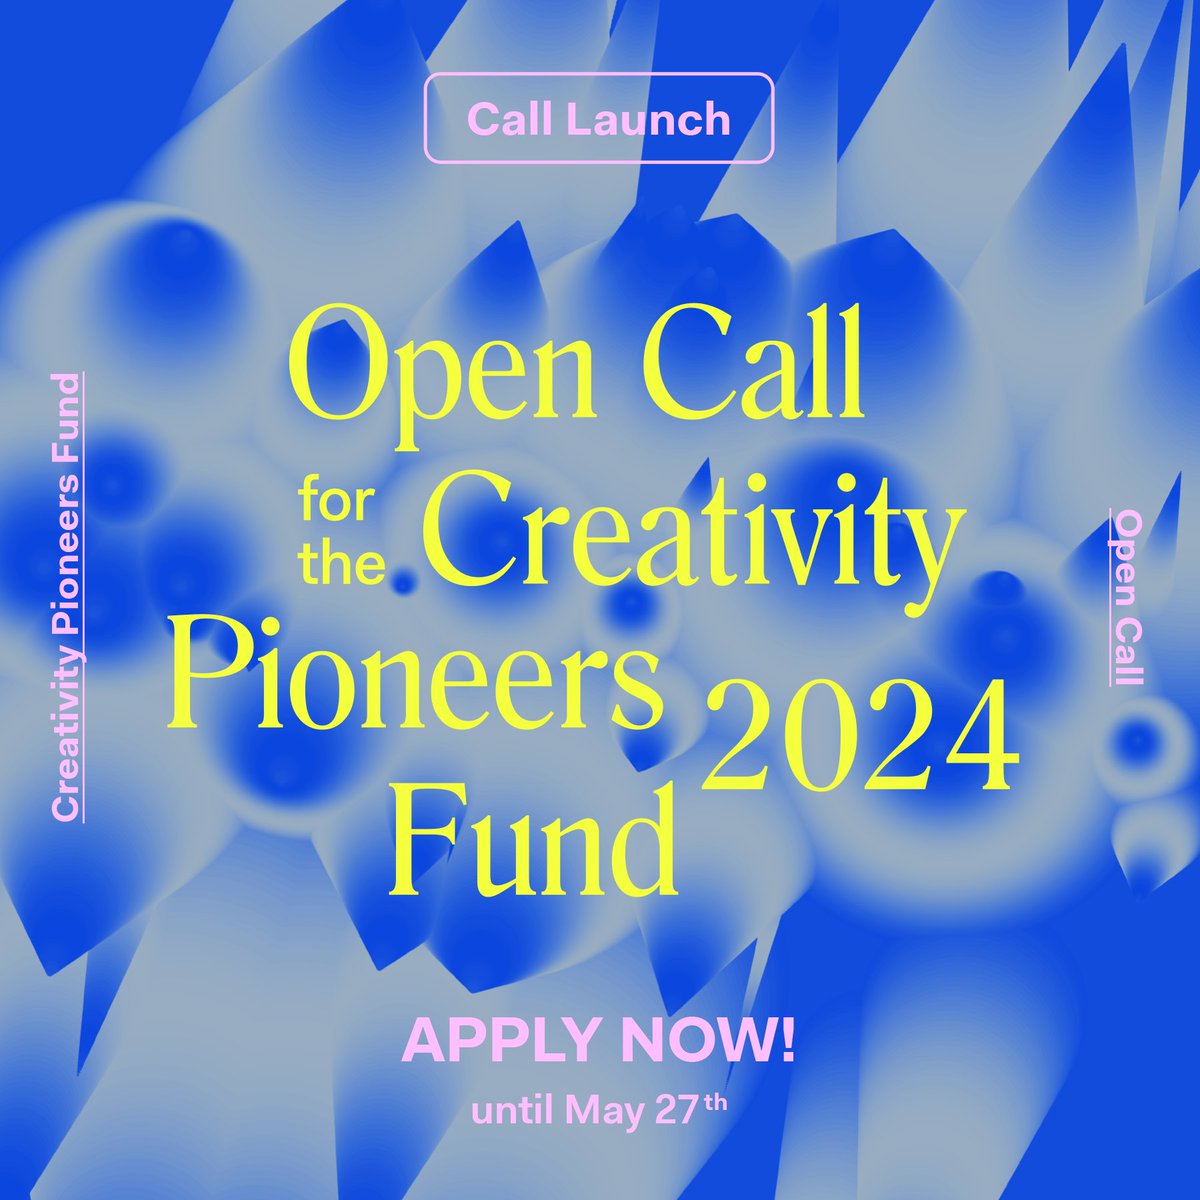 A great opportunity for any non-profit creative entity working towards social change! We became #moleskinefoundation #CreativityPioneers last year, and the connections we formed and opportunities we have been given are amazing. #creativityforsocialchange …ativitypioneersfund.ca.optimytool.com/en/